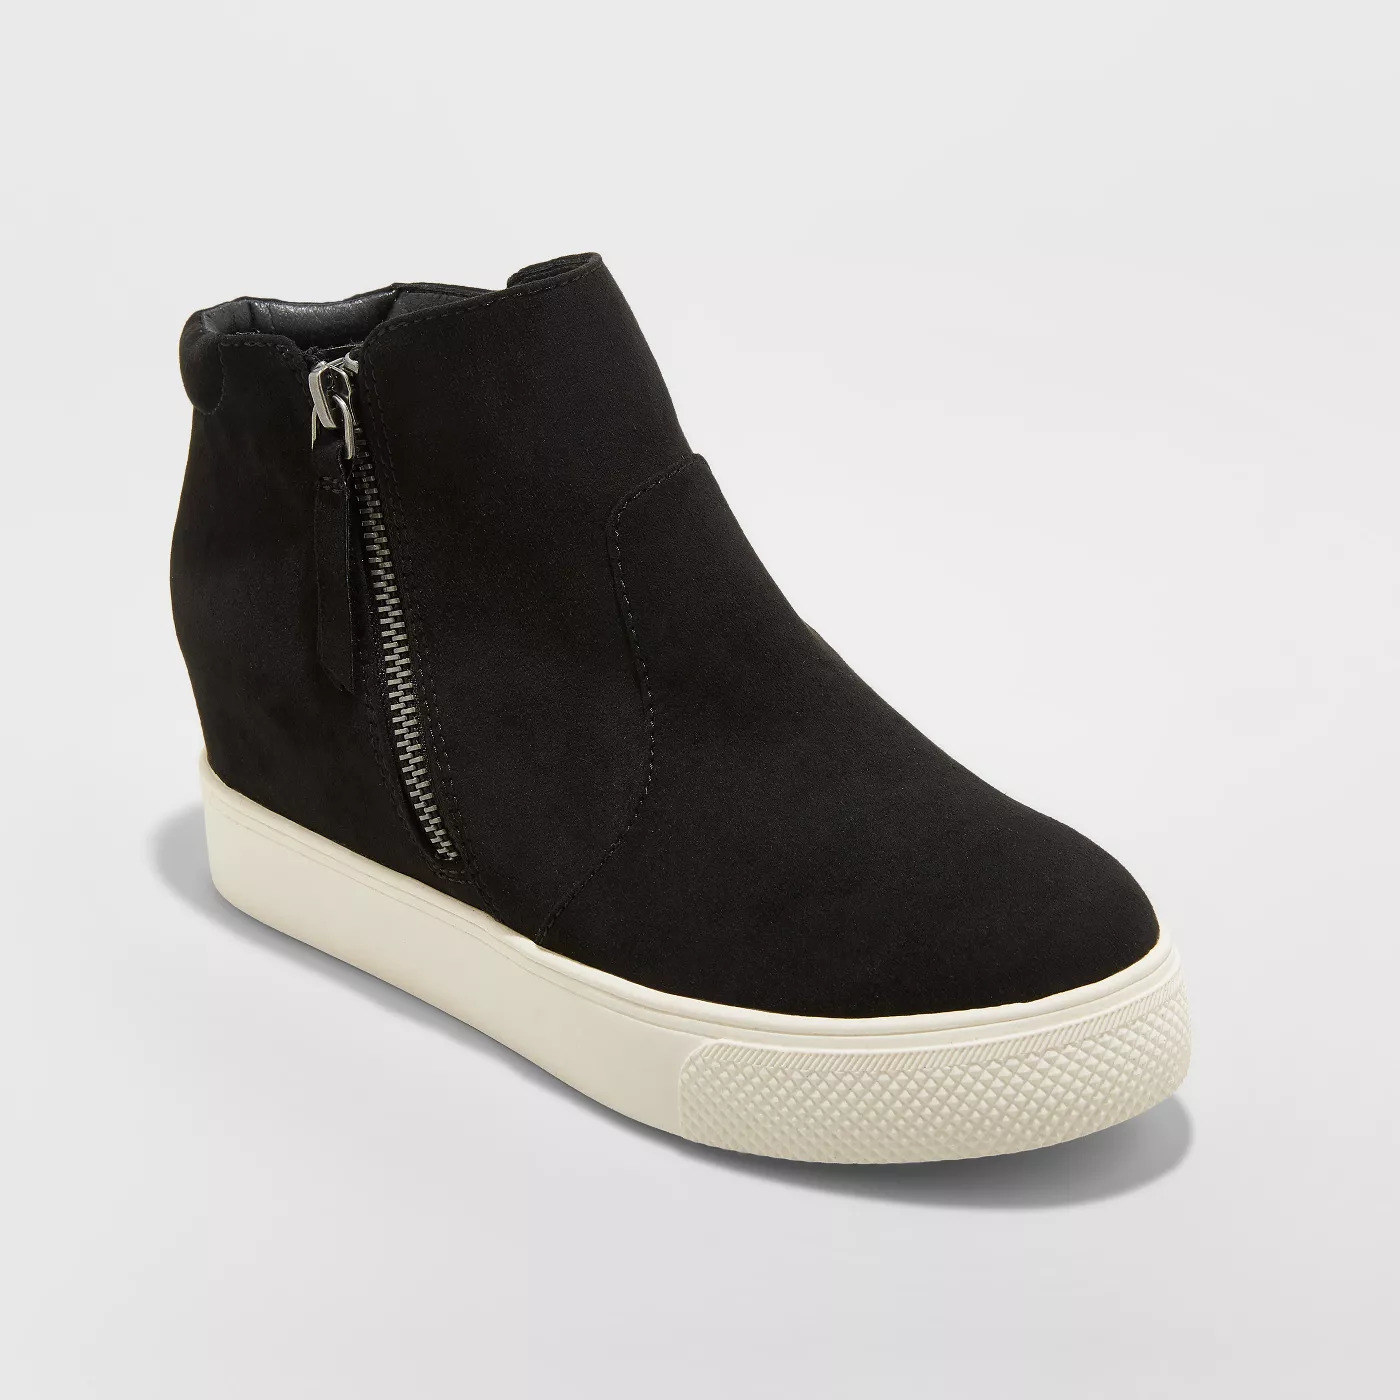 A black high top sneaker with a flat rubber sole and zipper on the side